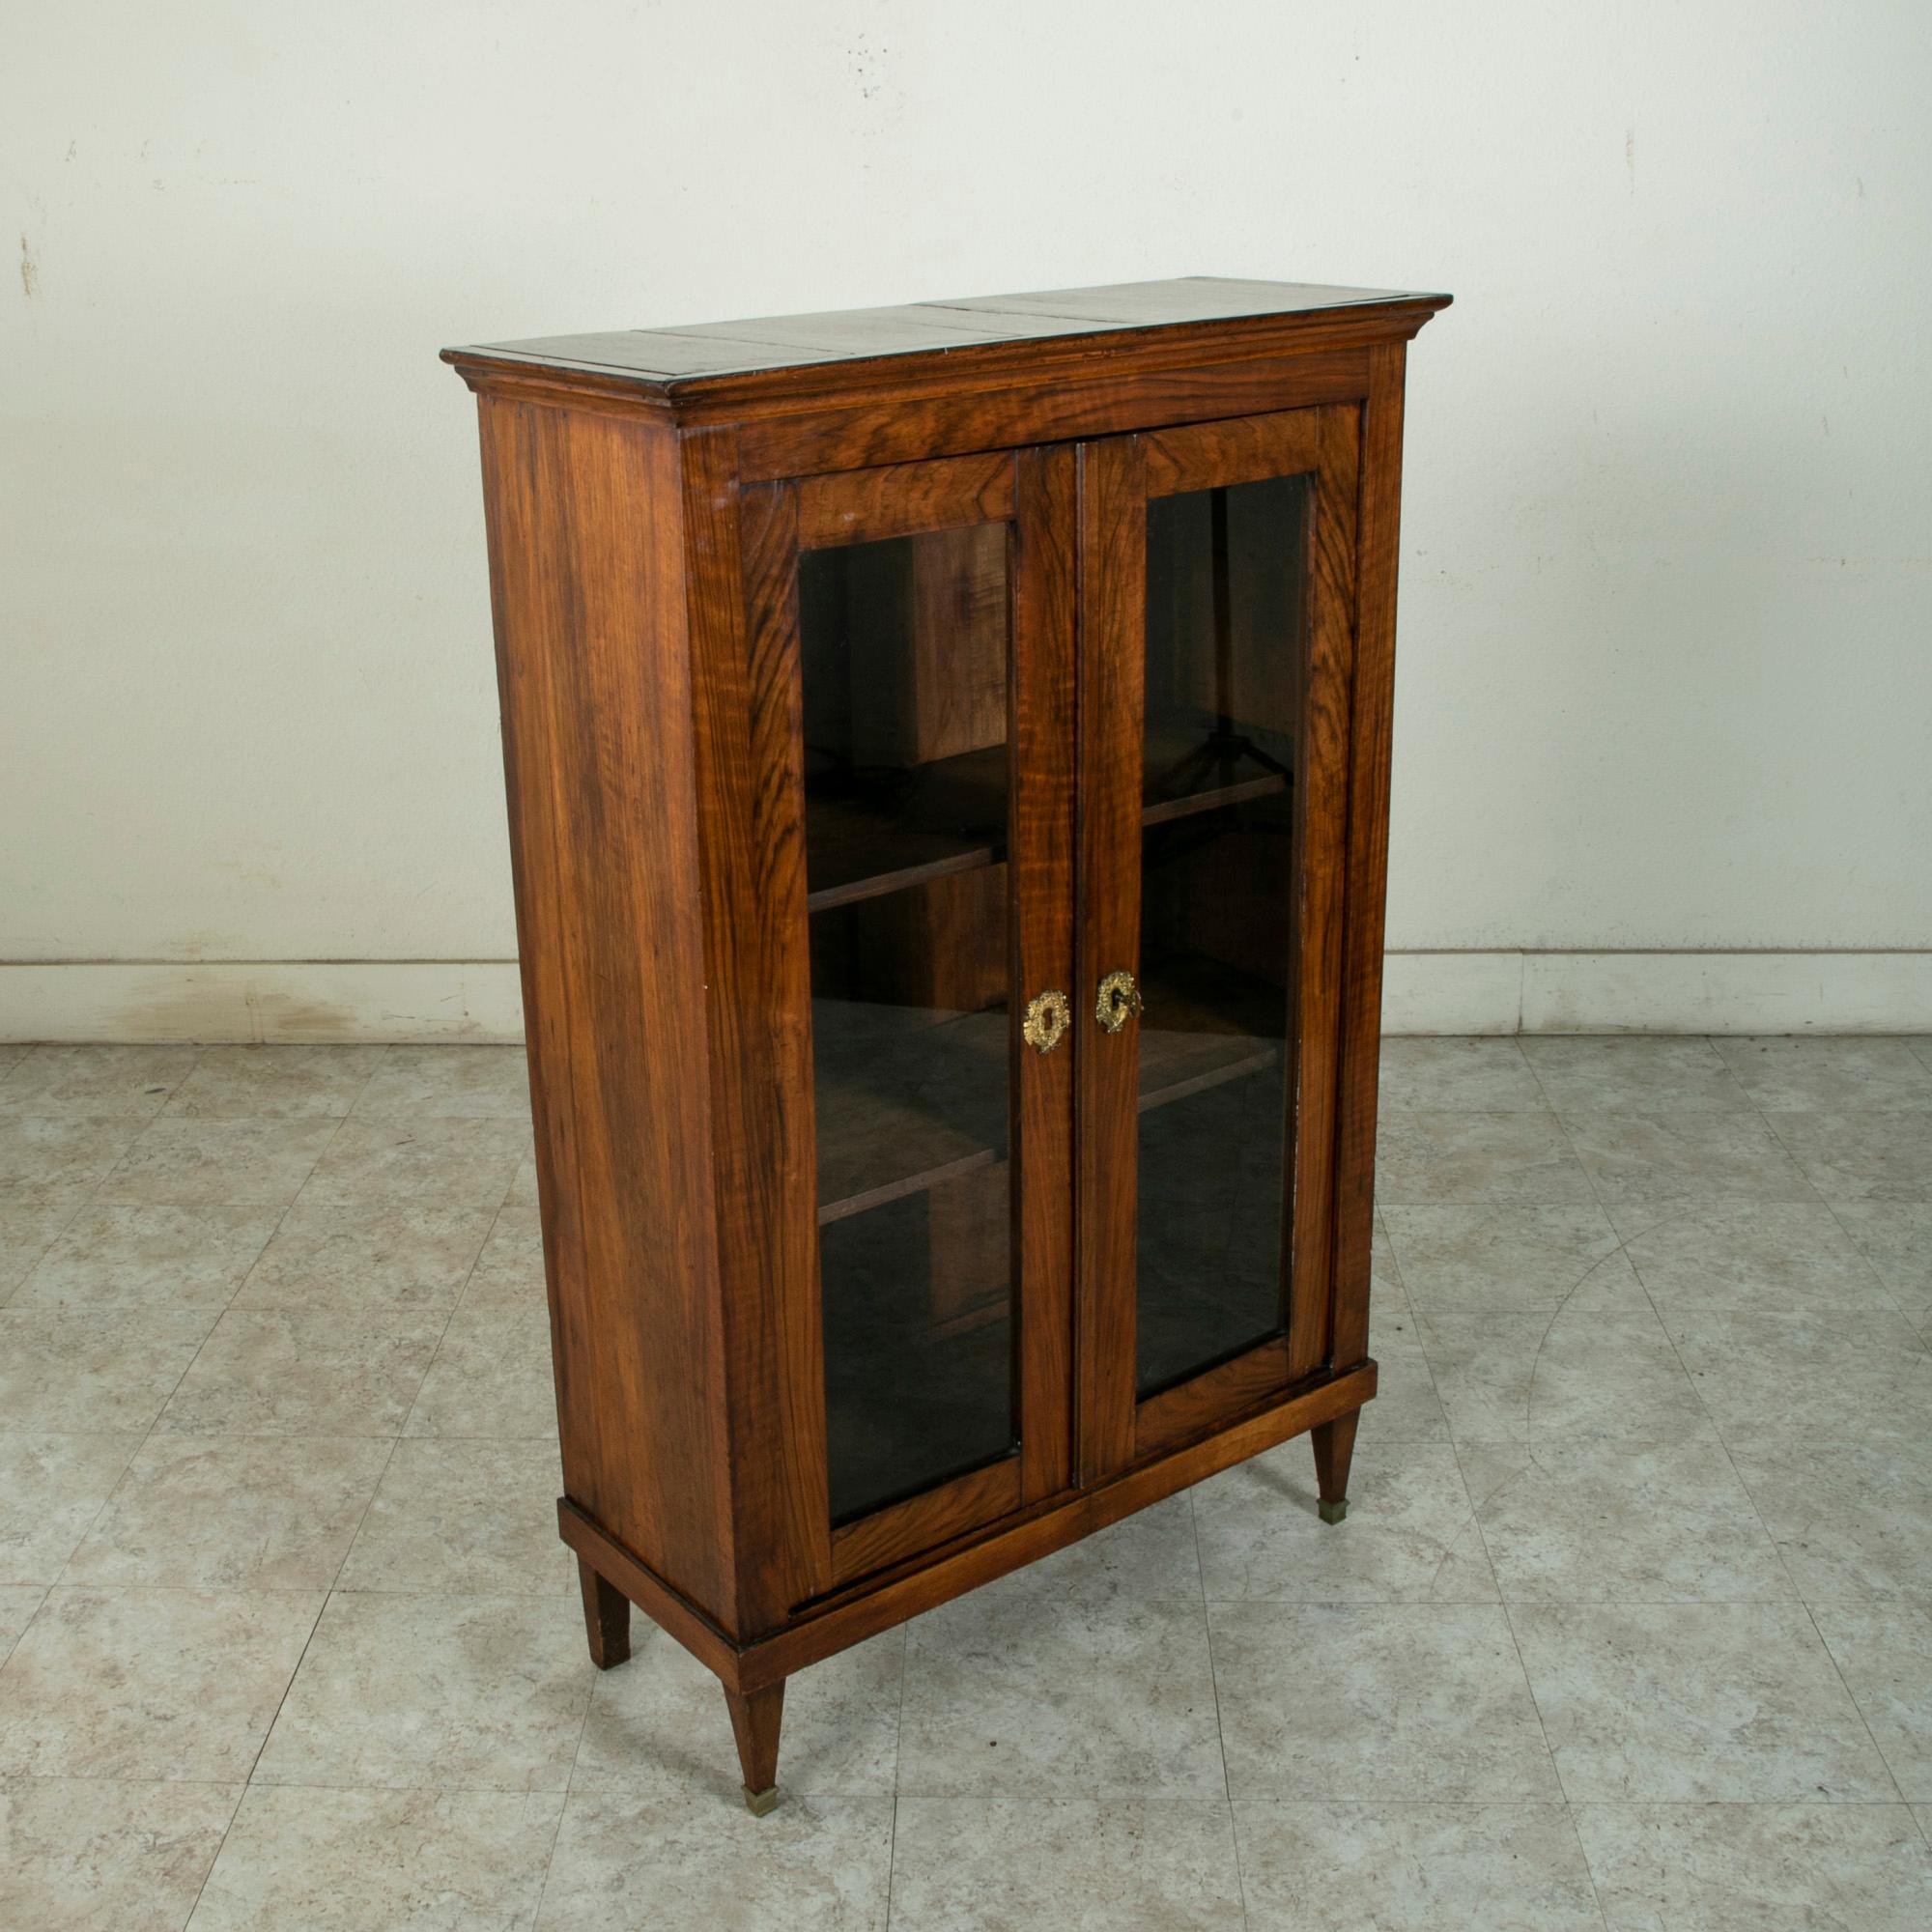 Standing at 51 inches in height, this small scale late eighteenth century French Louis XVI period palisander bookcase or vitrine features its original hand blown glass doors. The doors are appointed with bronze escutcheons detailed with cornucopia